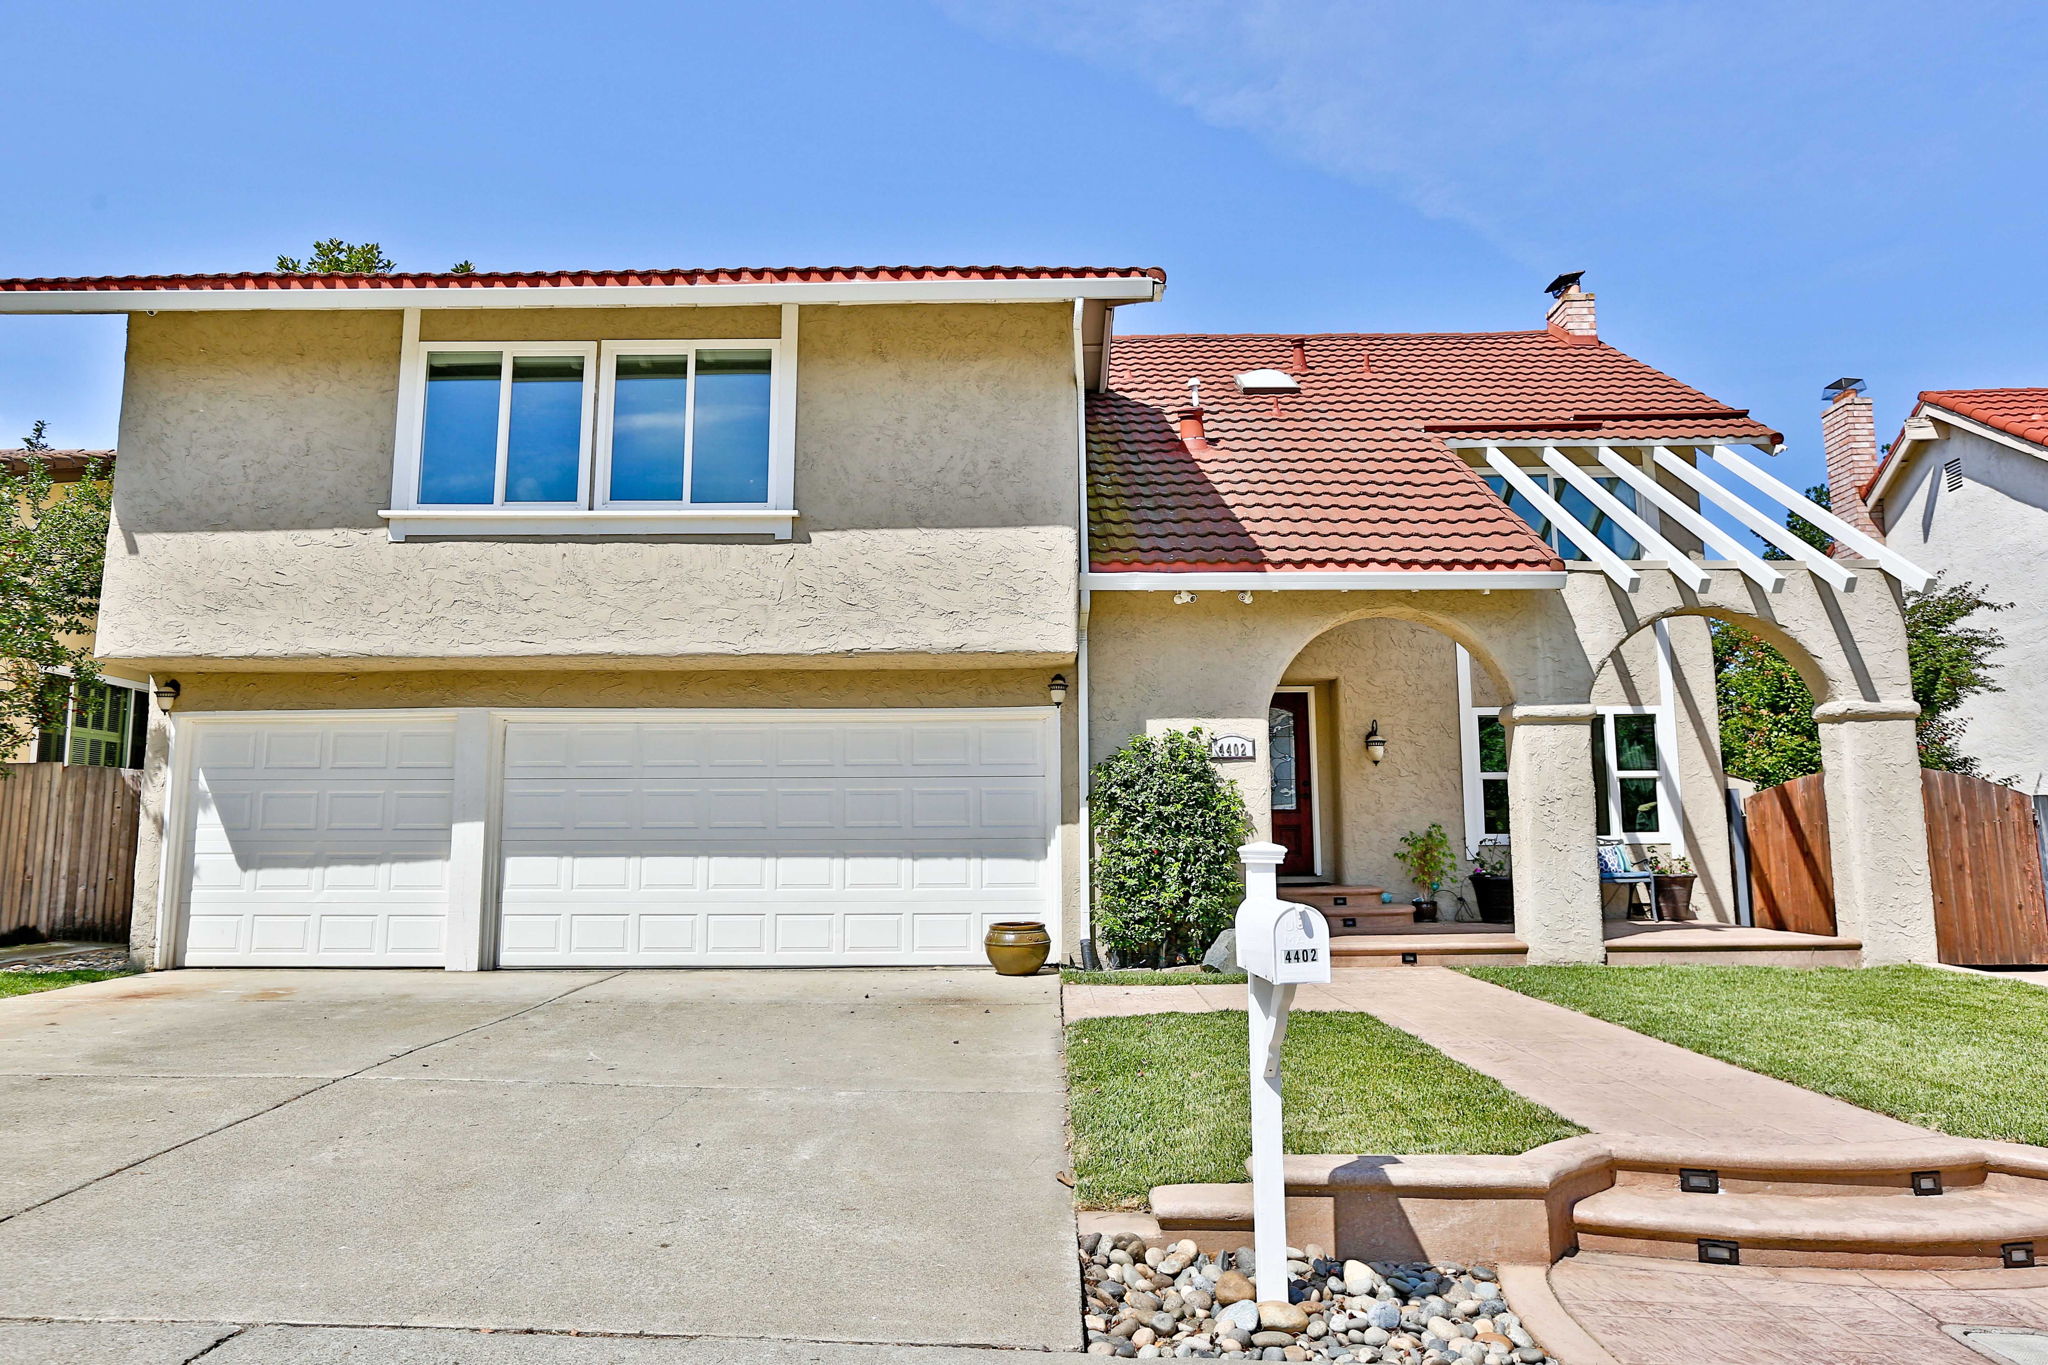  4402 Weeping Spruce Ct, Concord, CA 94521, US